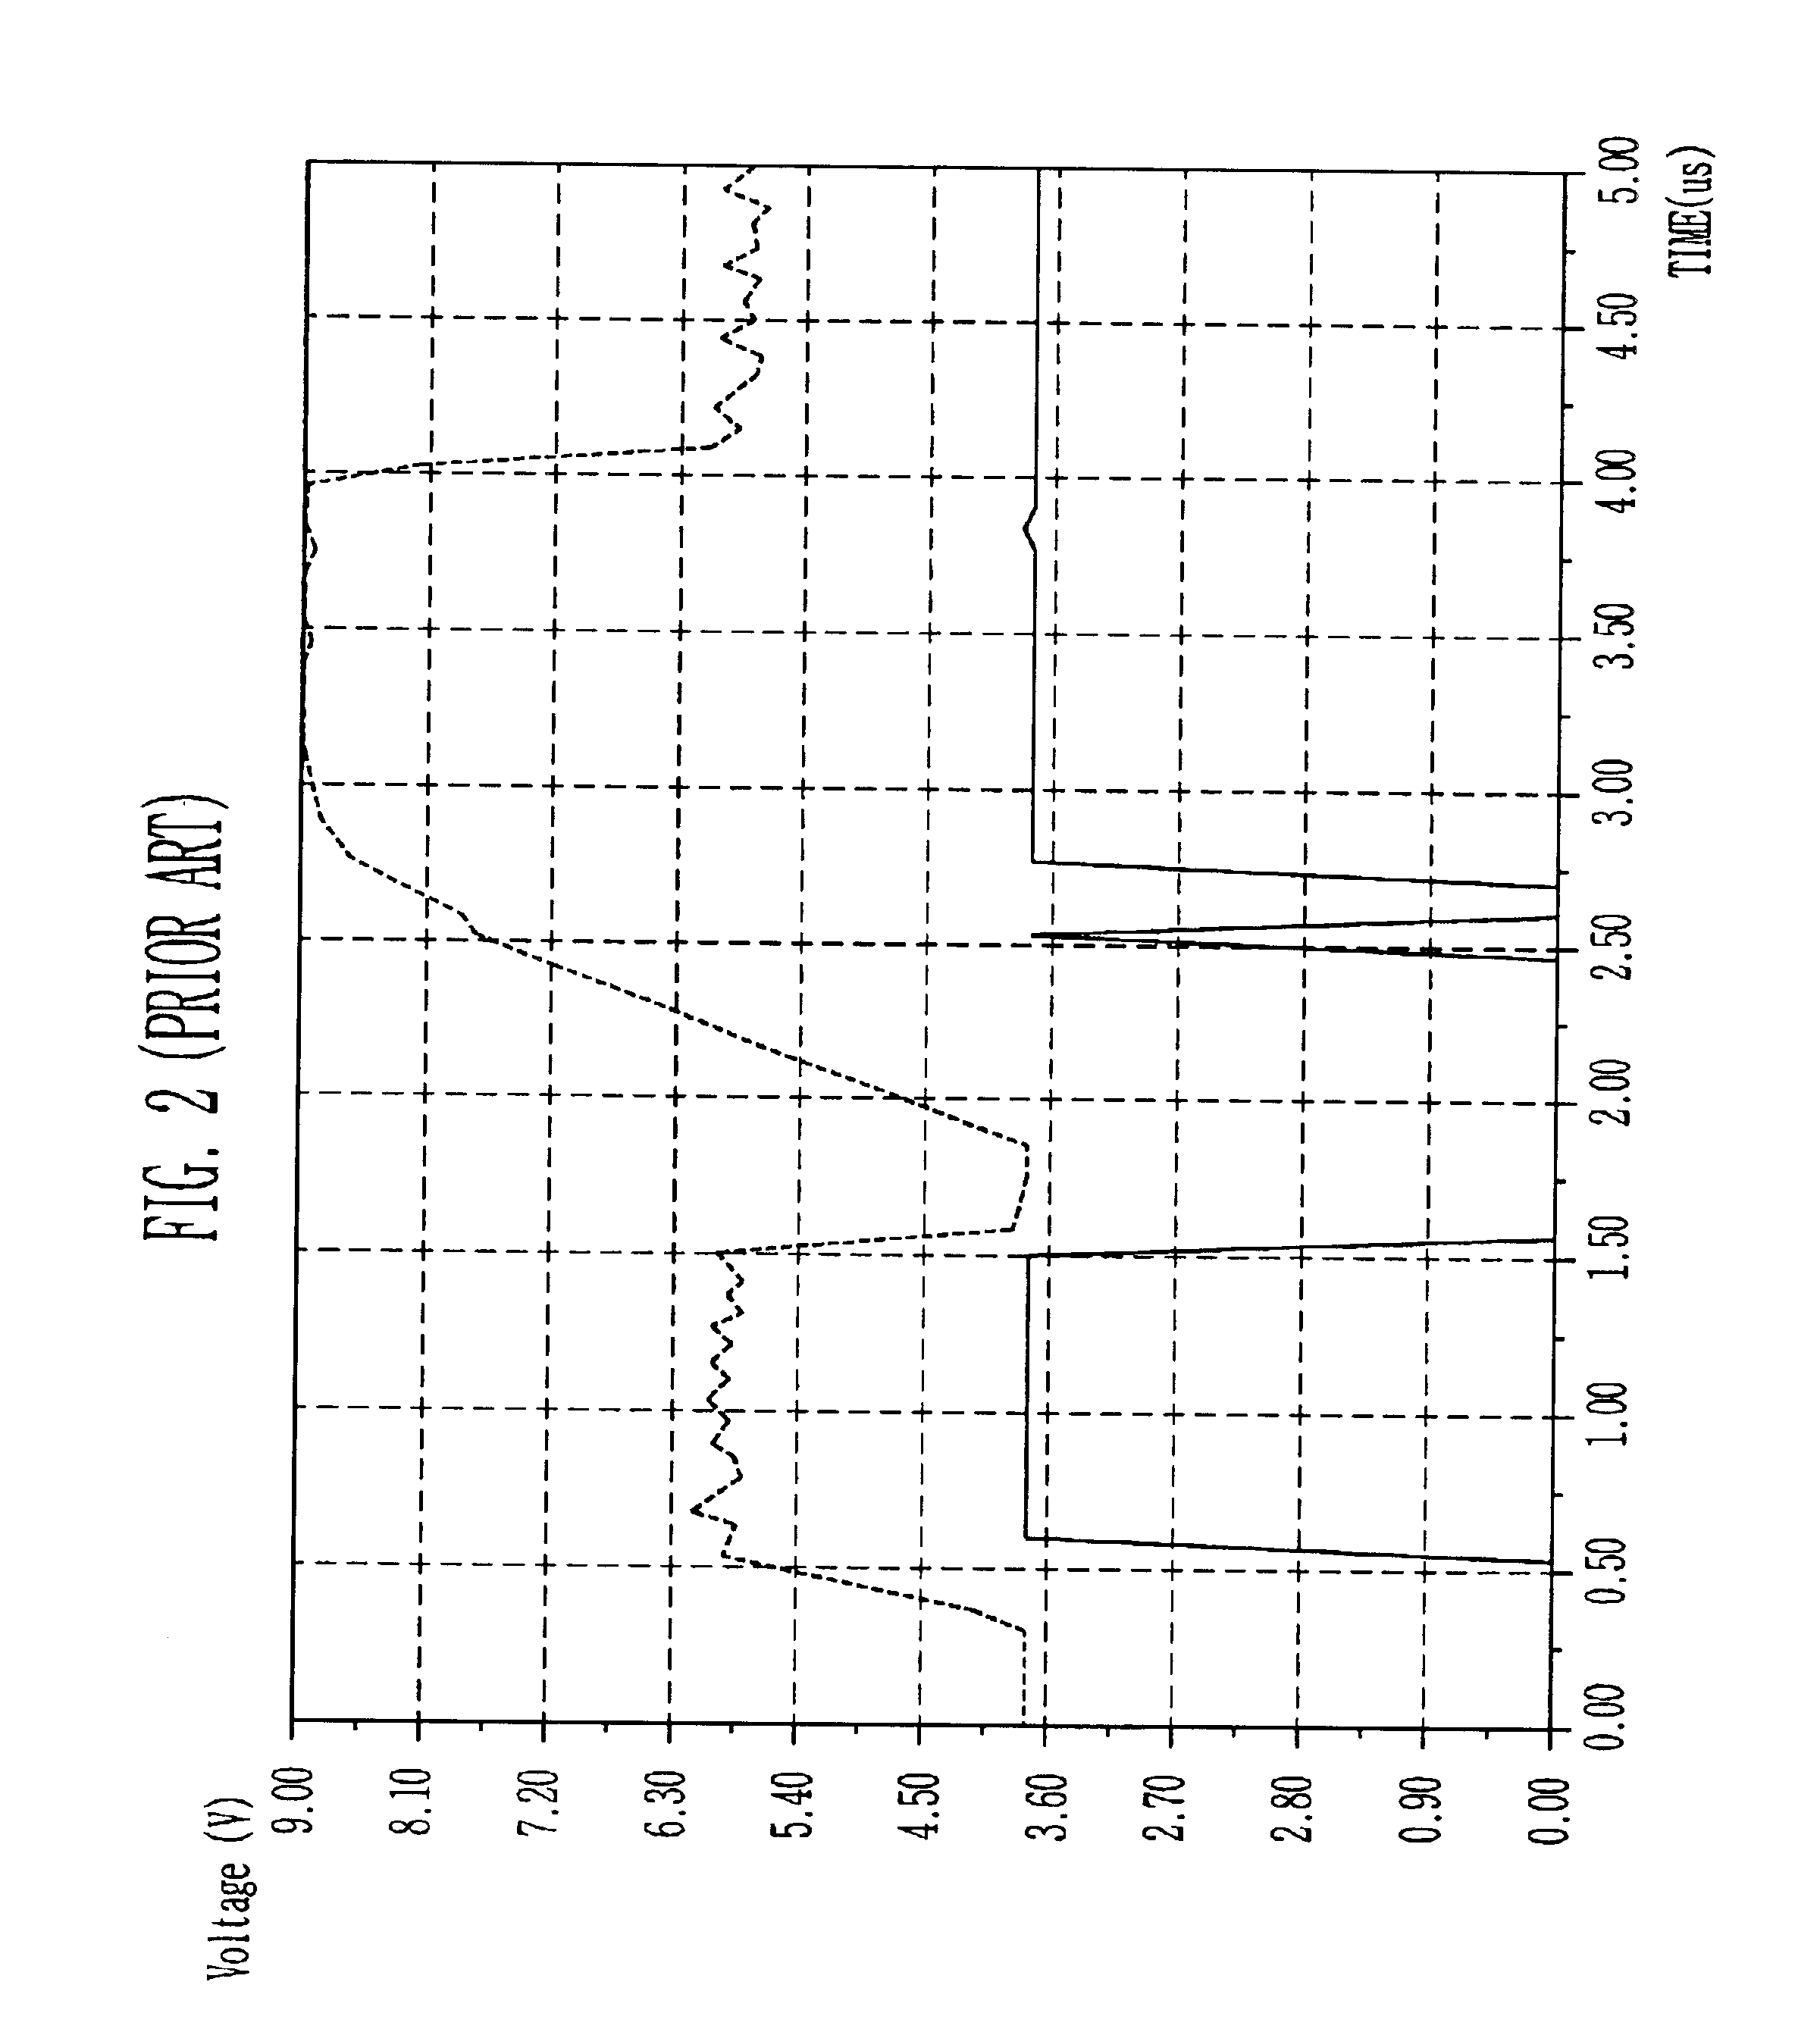 Pumping circuit for outputting program voltage and program verify voltage of different levels